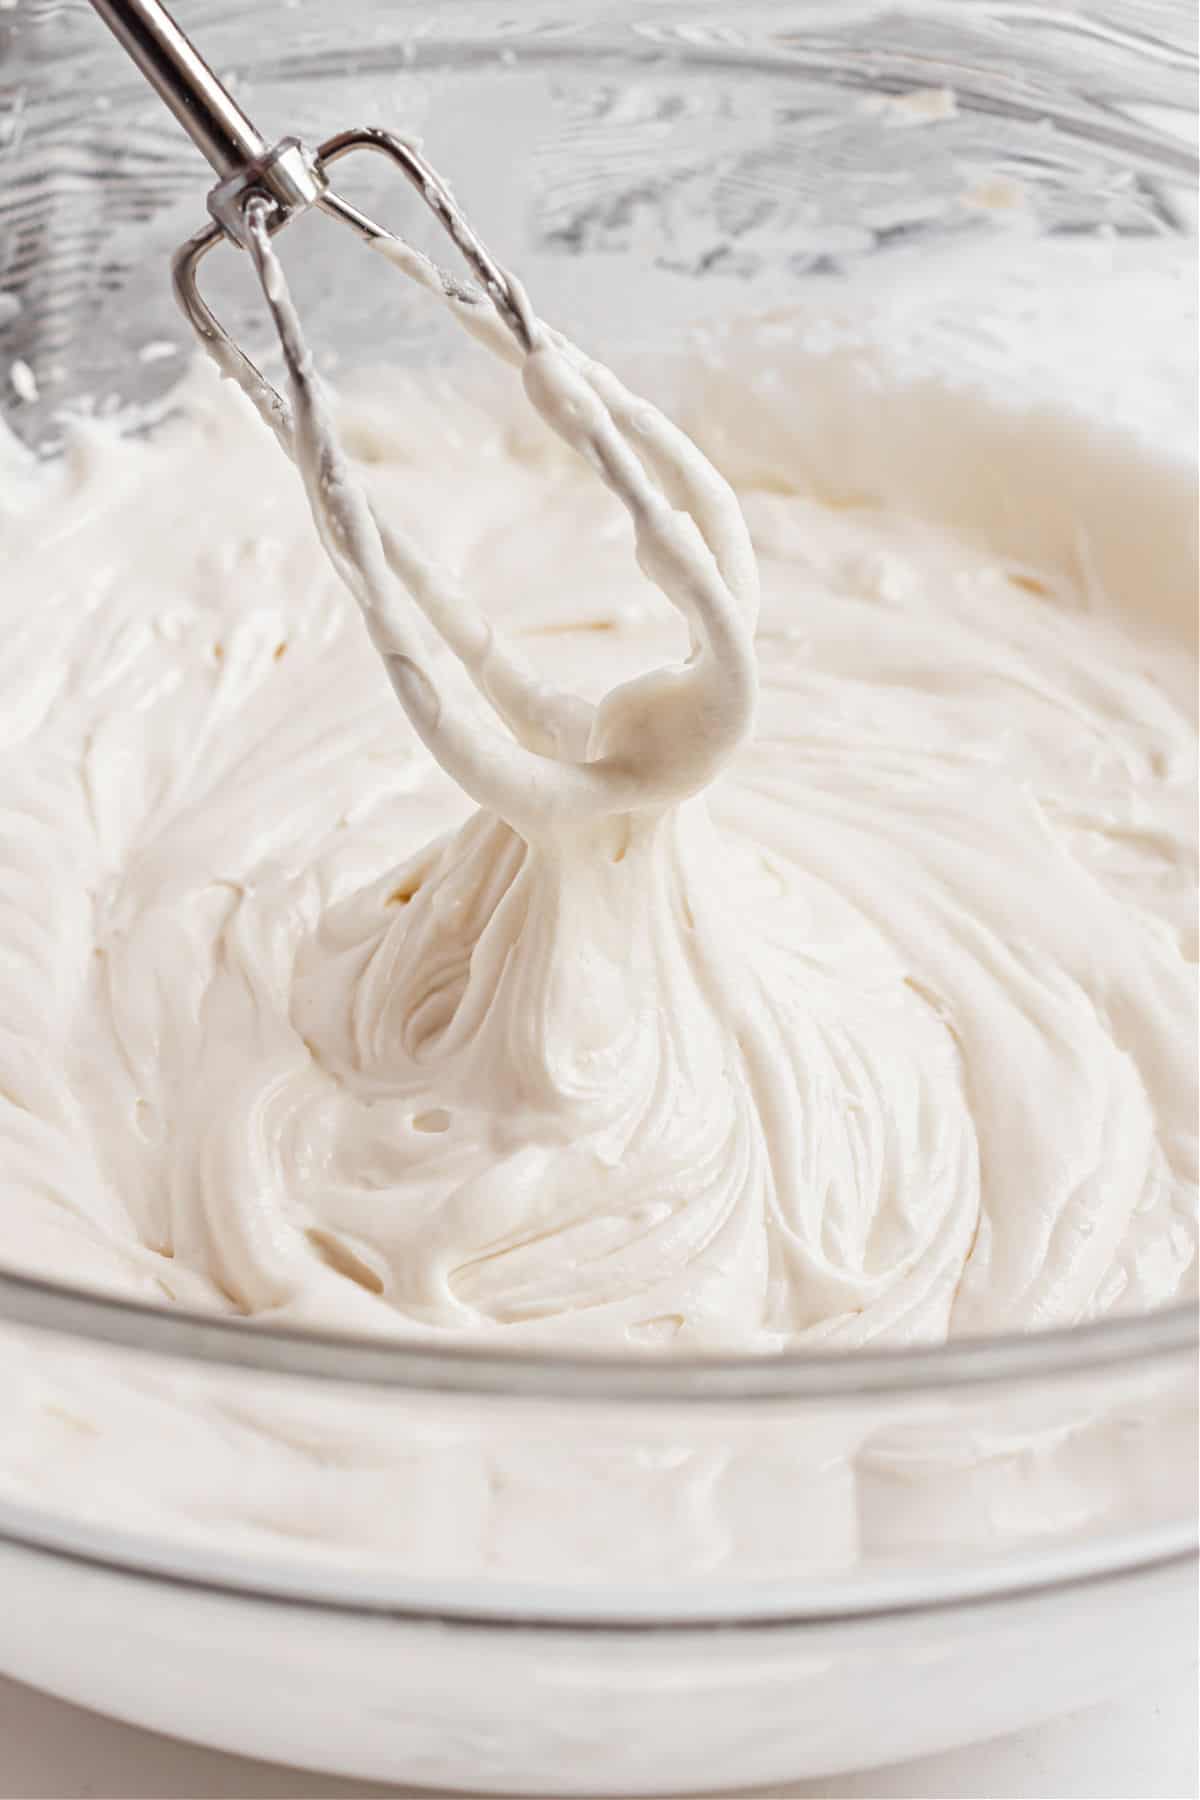 Vanilla frosting made with sour cream in a clear glass mixing bowl.